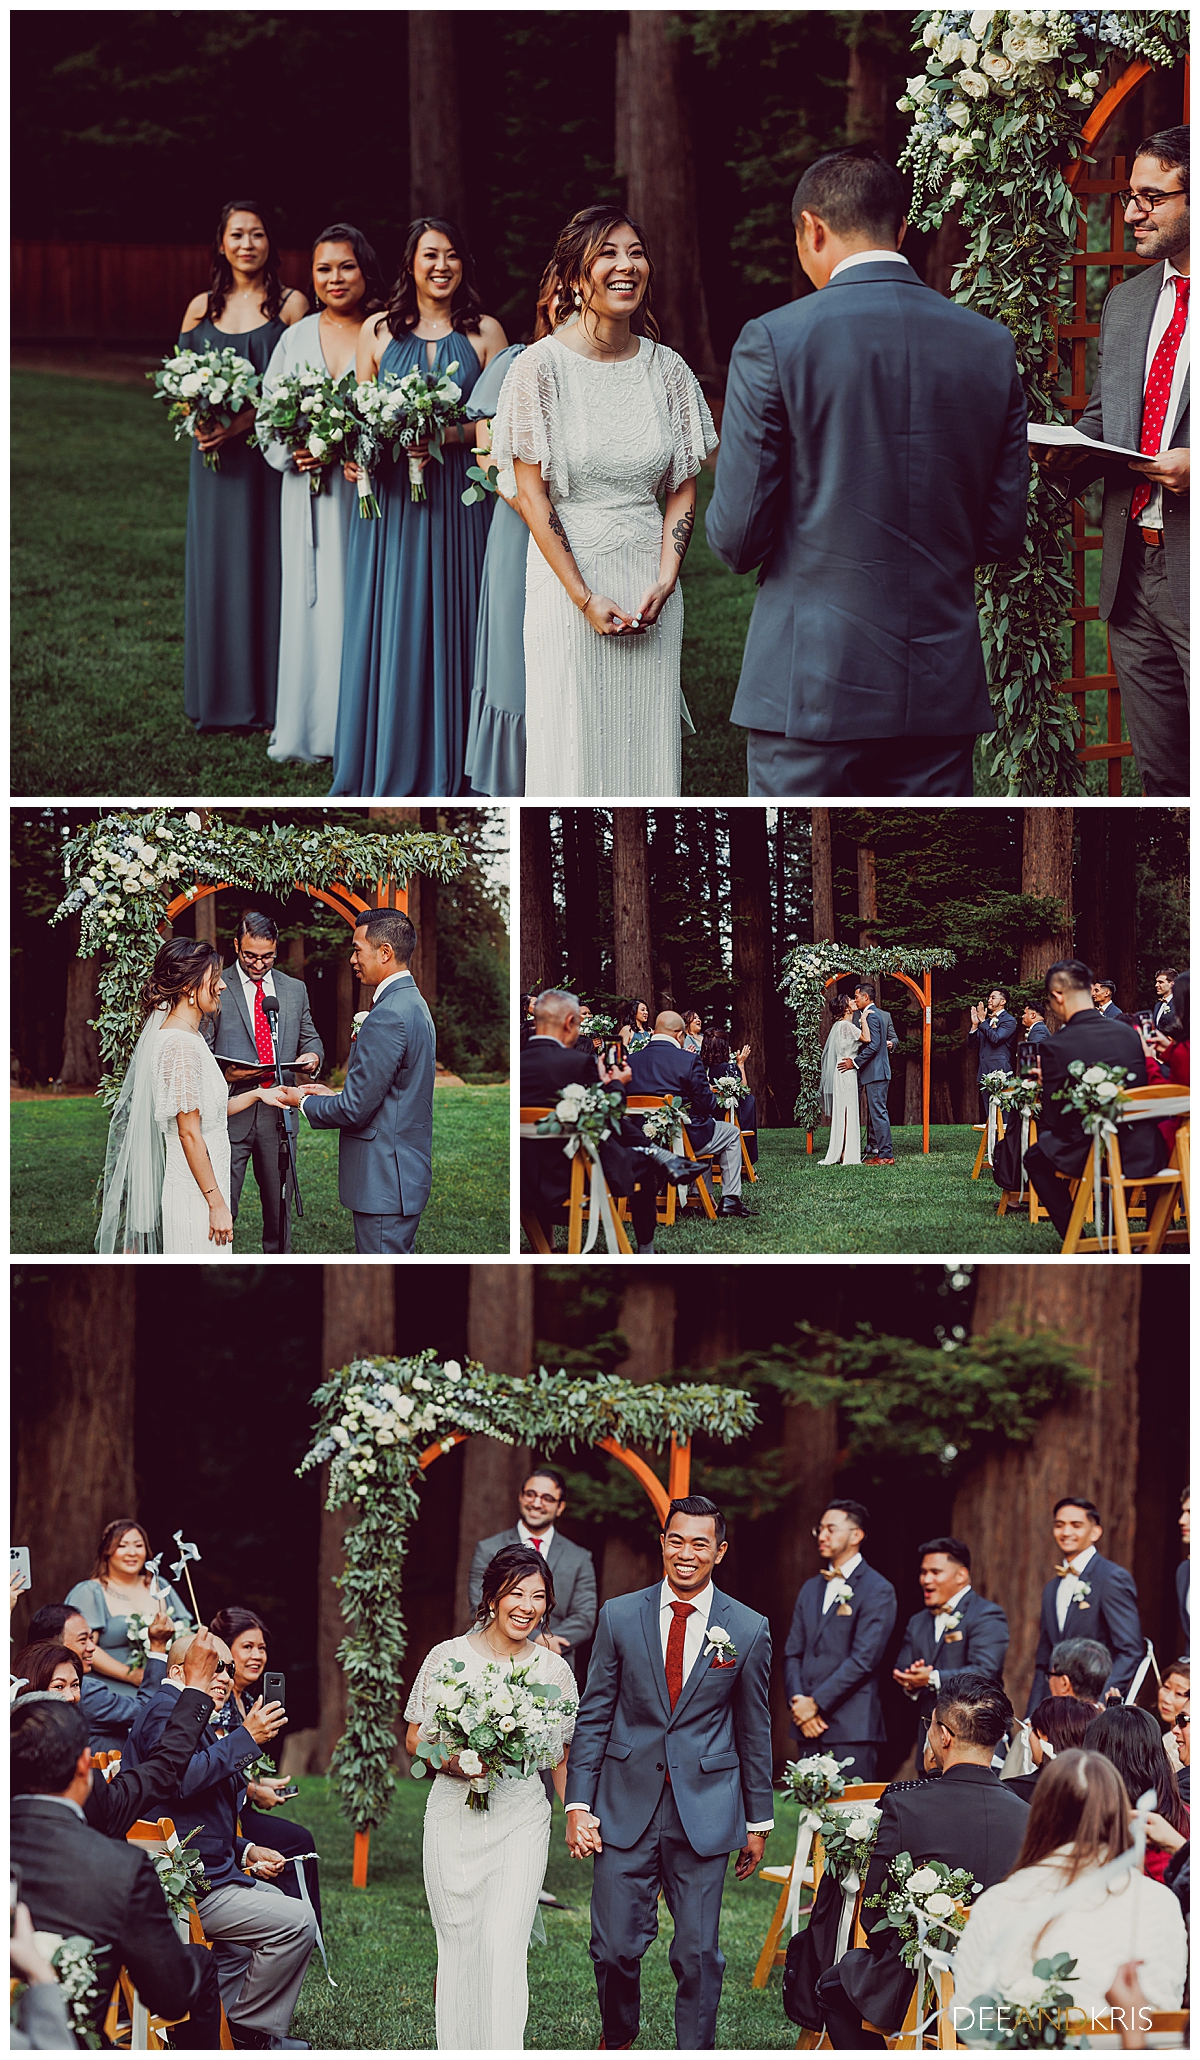 Five images: top image of bride laughing as she looks at groom and bridesmaids look on.  Middle left image of groom placing ring on bride's finger. Middle right image of first kiss. Bottom image of bride and groom in recessional smiling at guests.